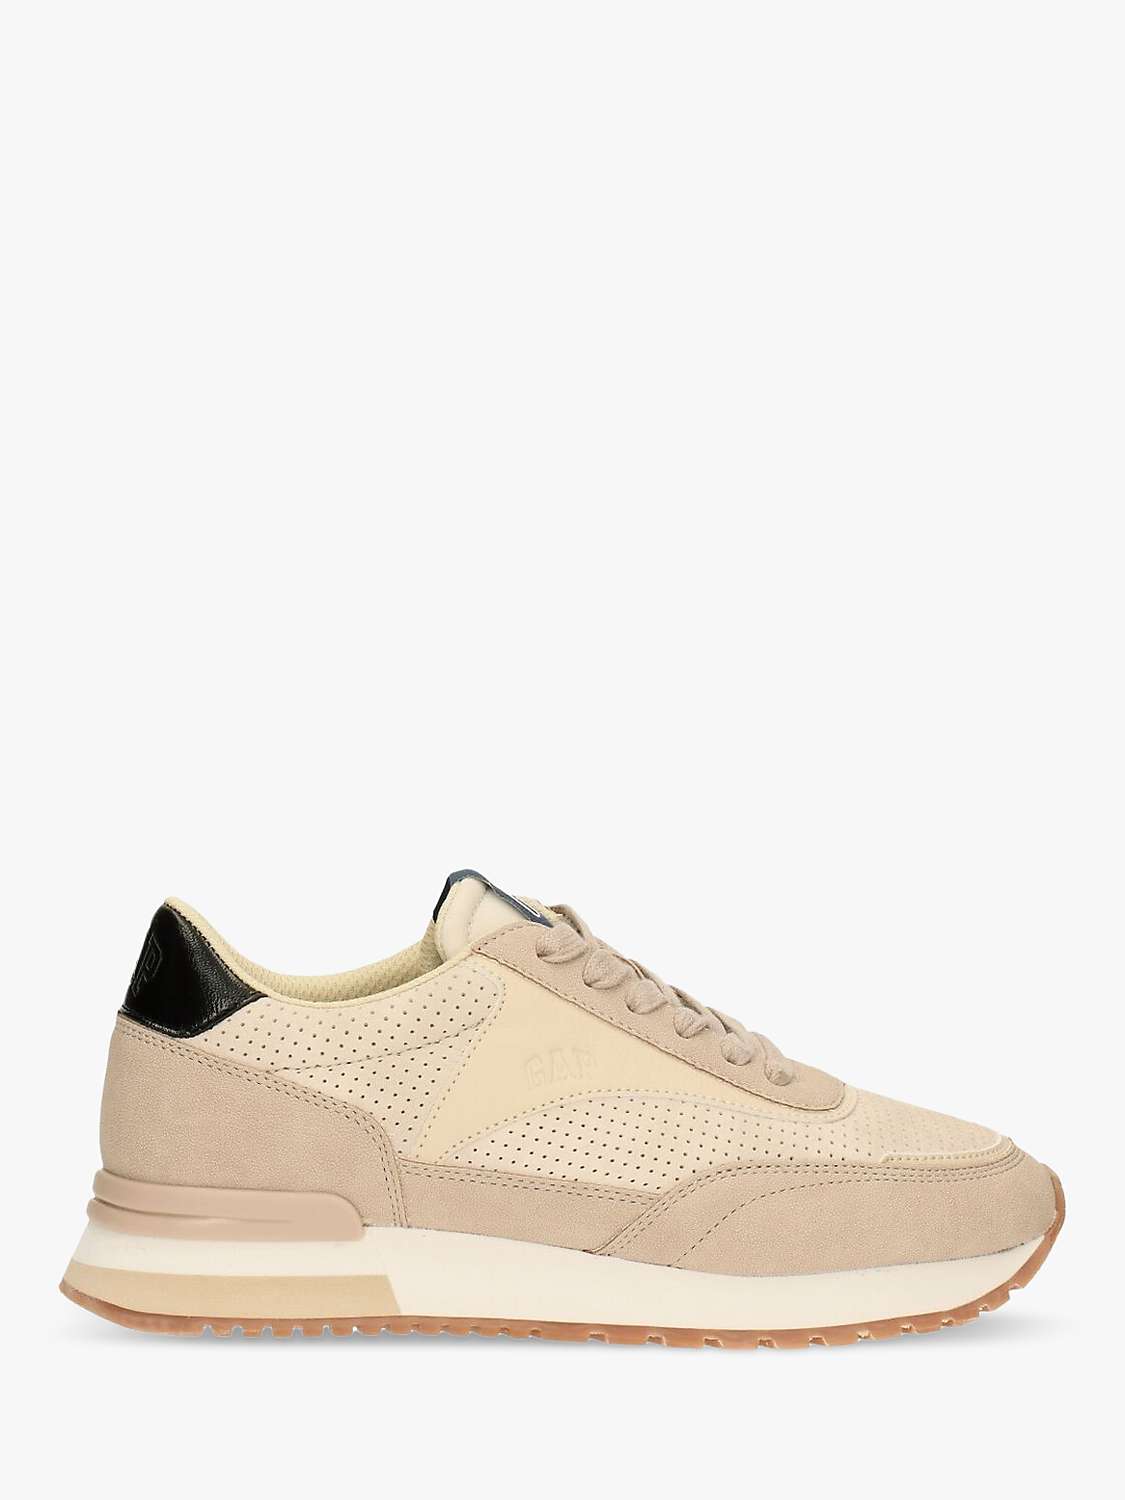 Buy Gap Kids' New York Perforated Lace Up Trainers, Sand/Khaki Online at johnlewis.com